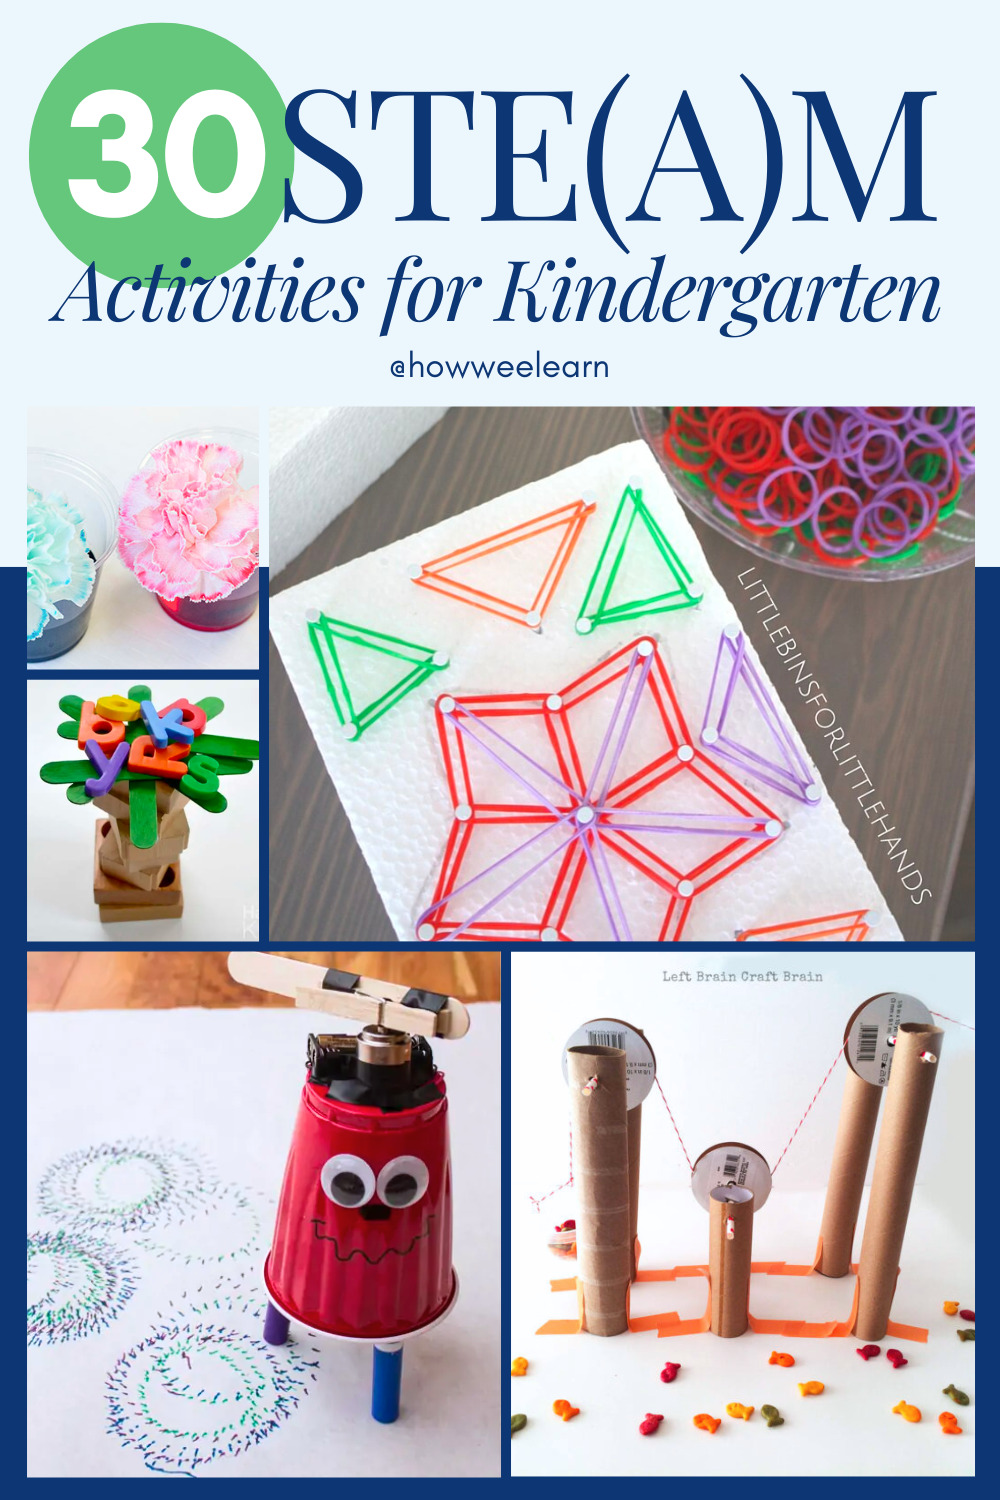 Adding STEM (science, technology, engineering, math) activities to your kindergarten (or any grade!) lesson plans is a great way to include hands-on learning fun into your week!